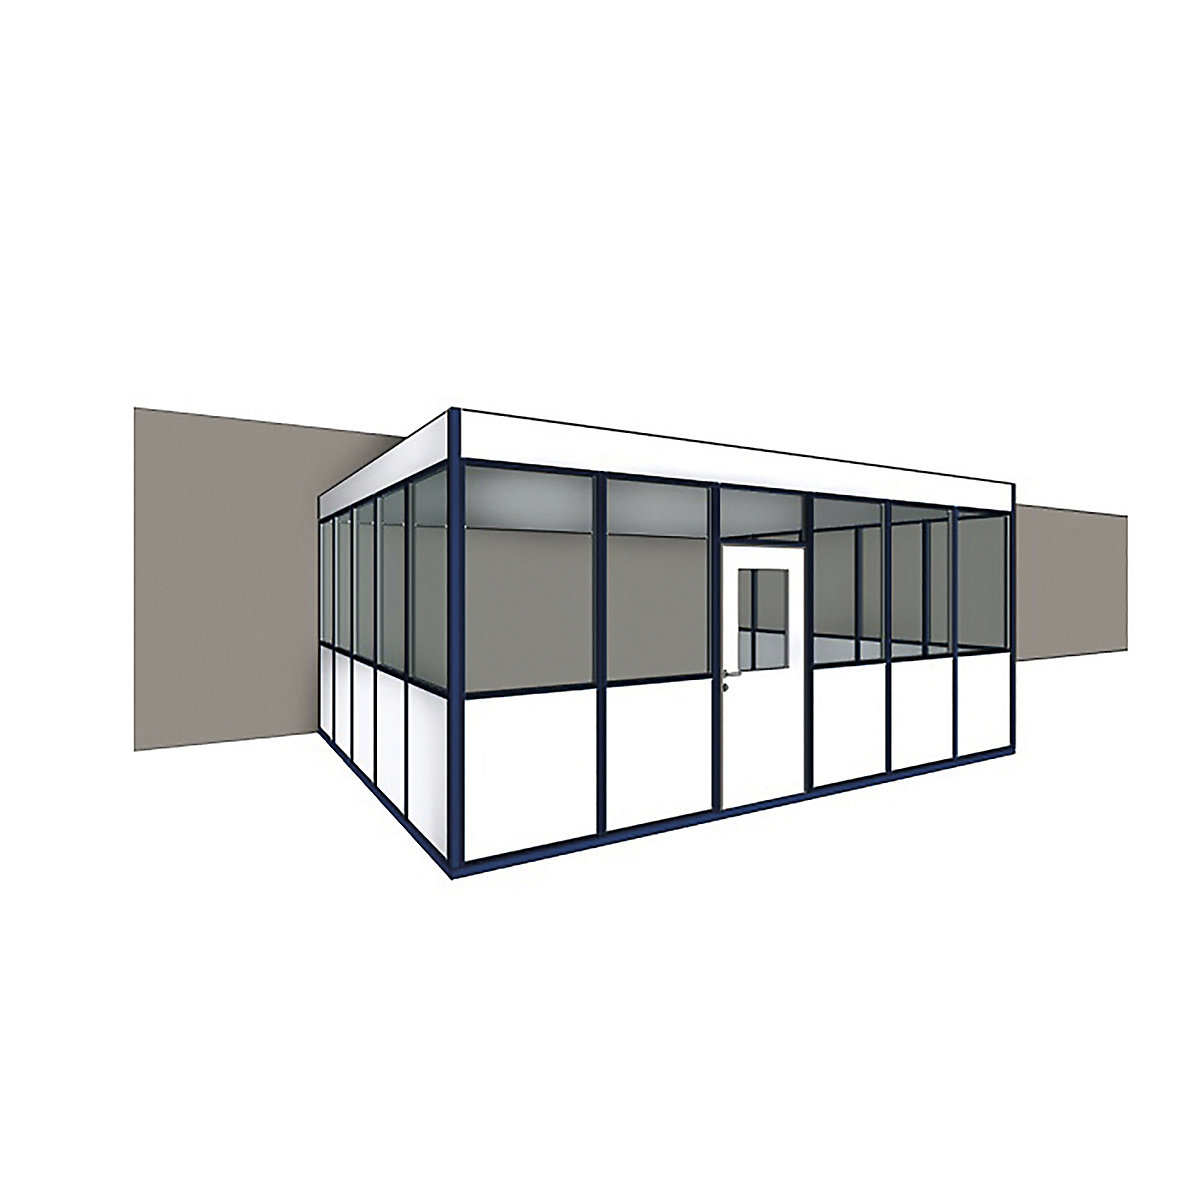 Prefab office, 3-sided, for installation against an existing wall